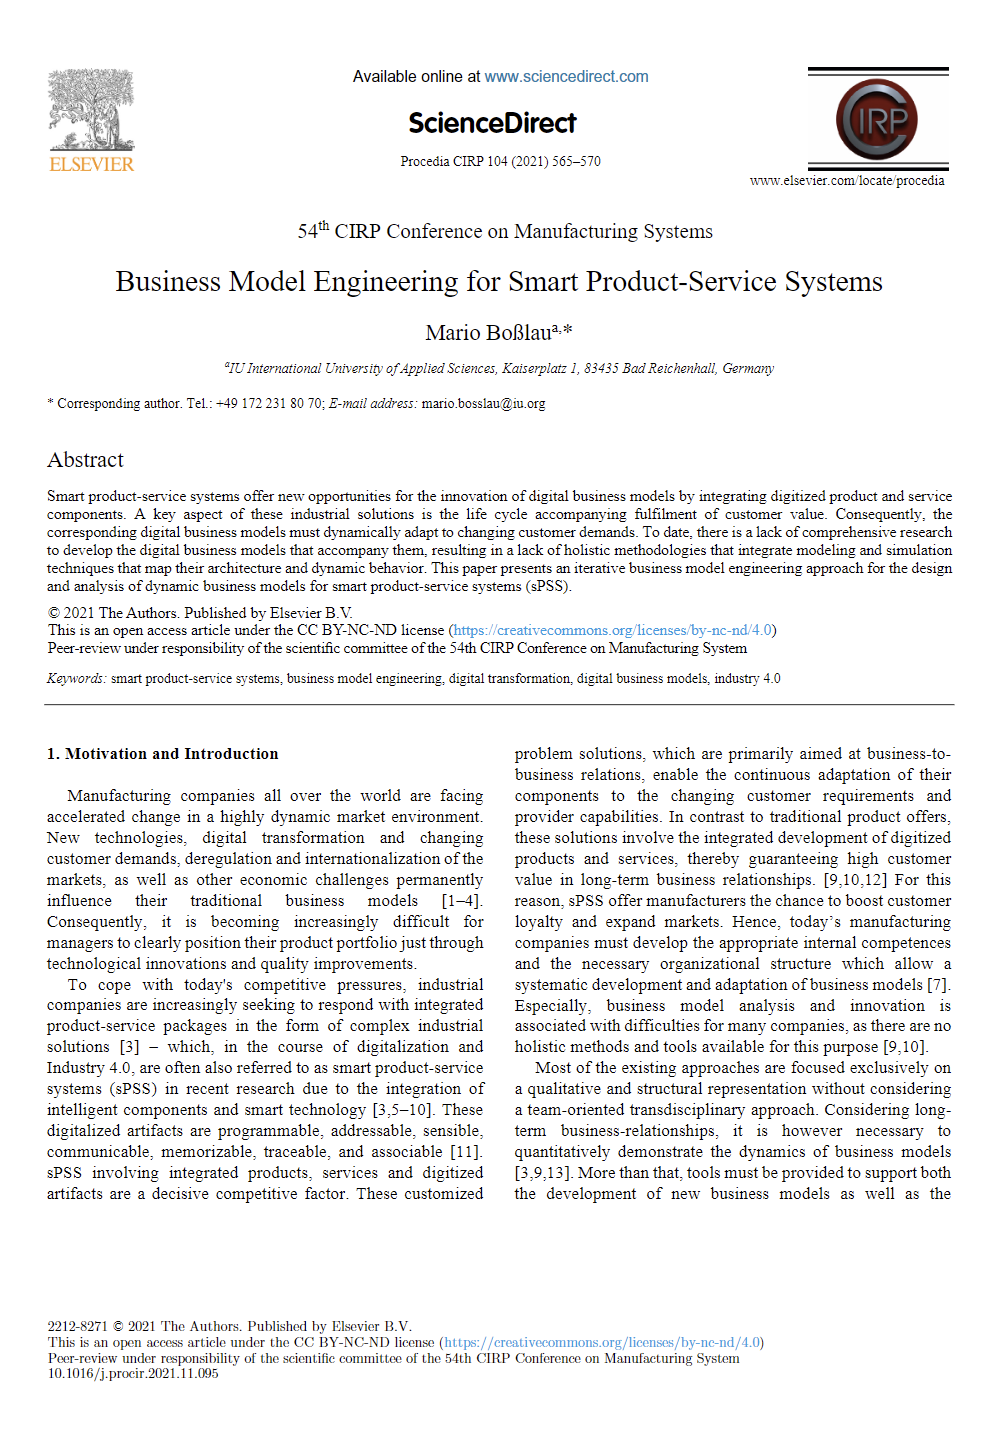 Business Model Engineering for Smart Product-Service Systems